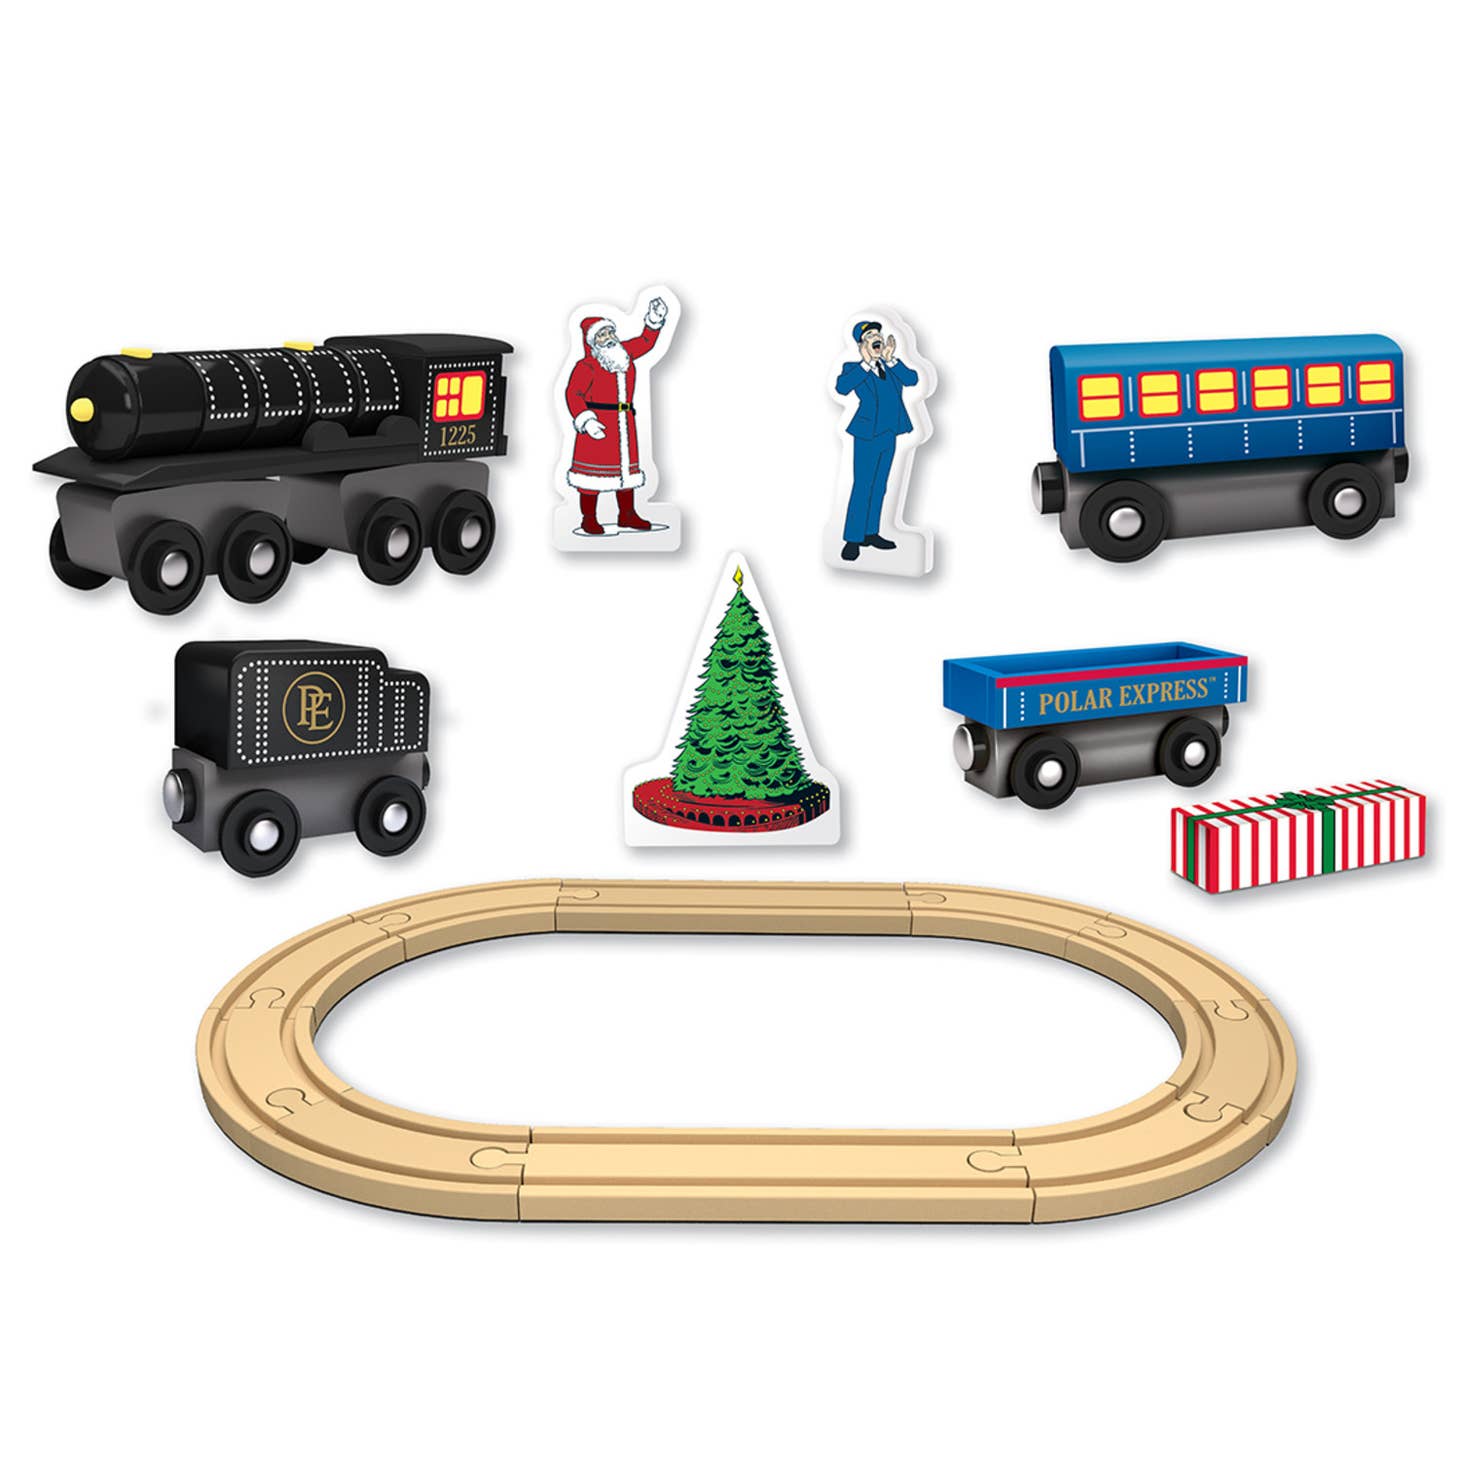 42077 The Polar Express Toy Train Set - Deluxe Edition